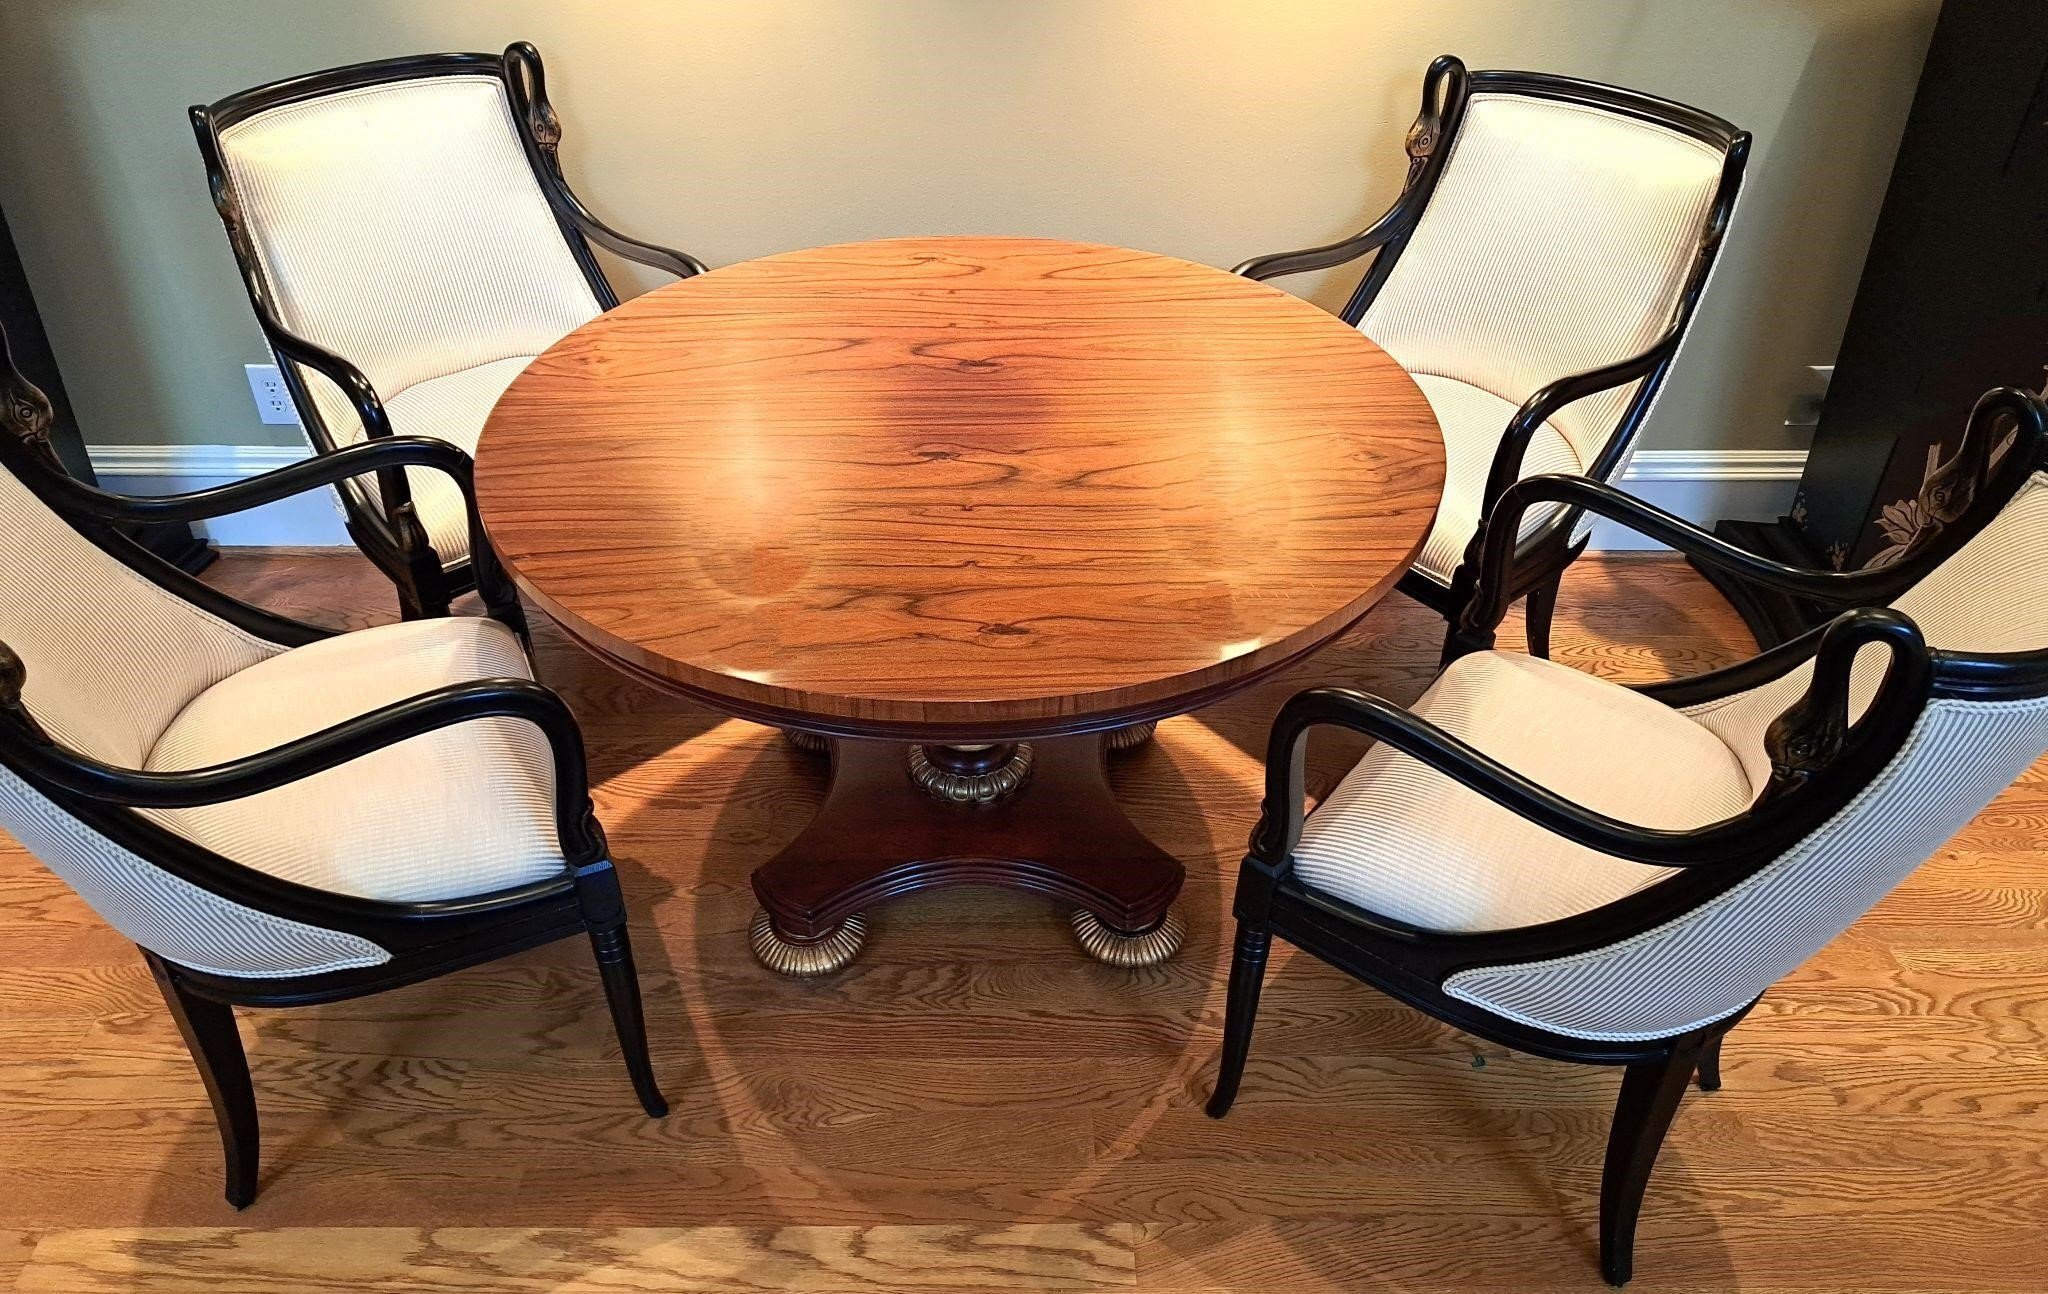 STUNNING SWAN NECK CHAIRS &SOLID WOOD ORNATE TABLE